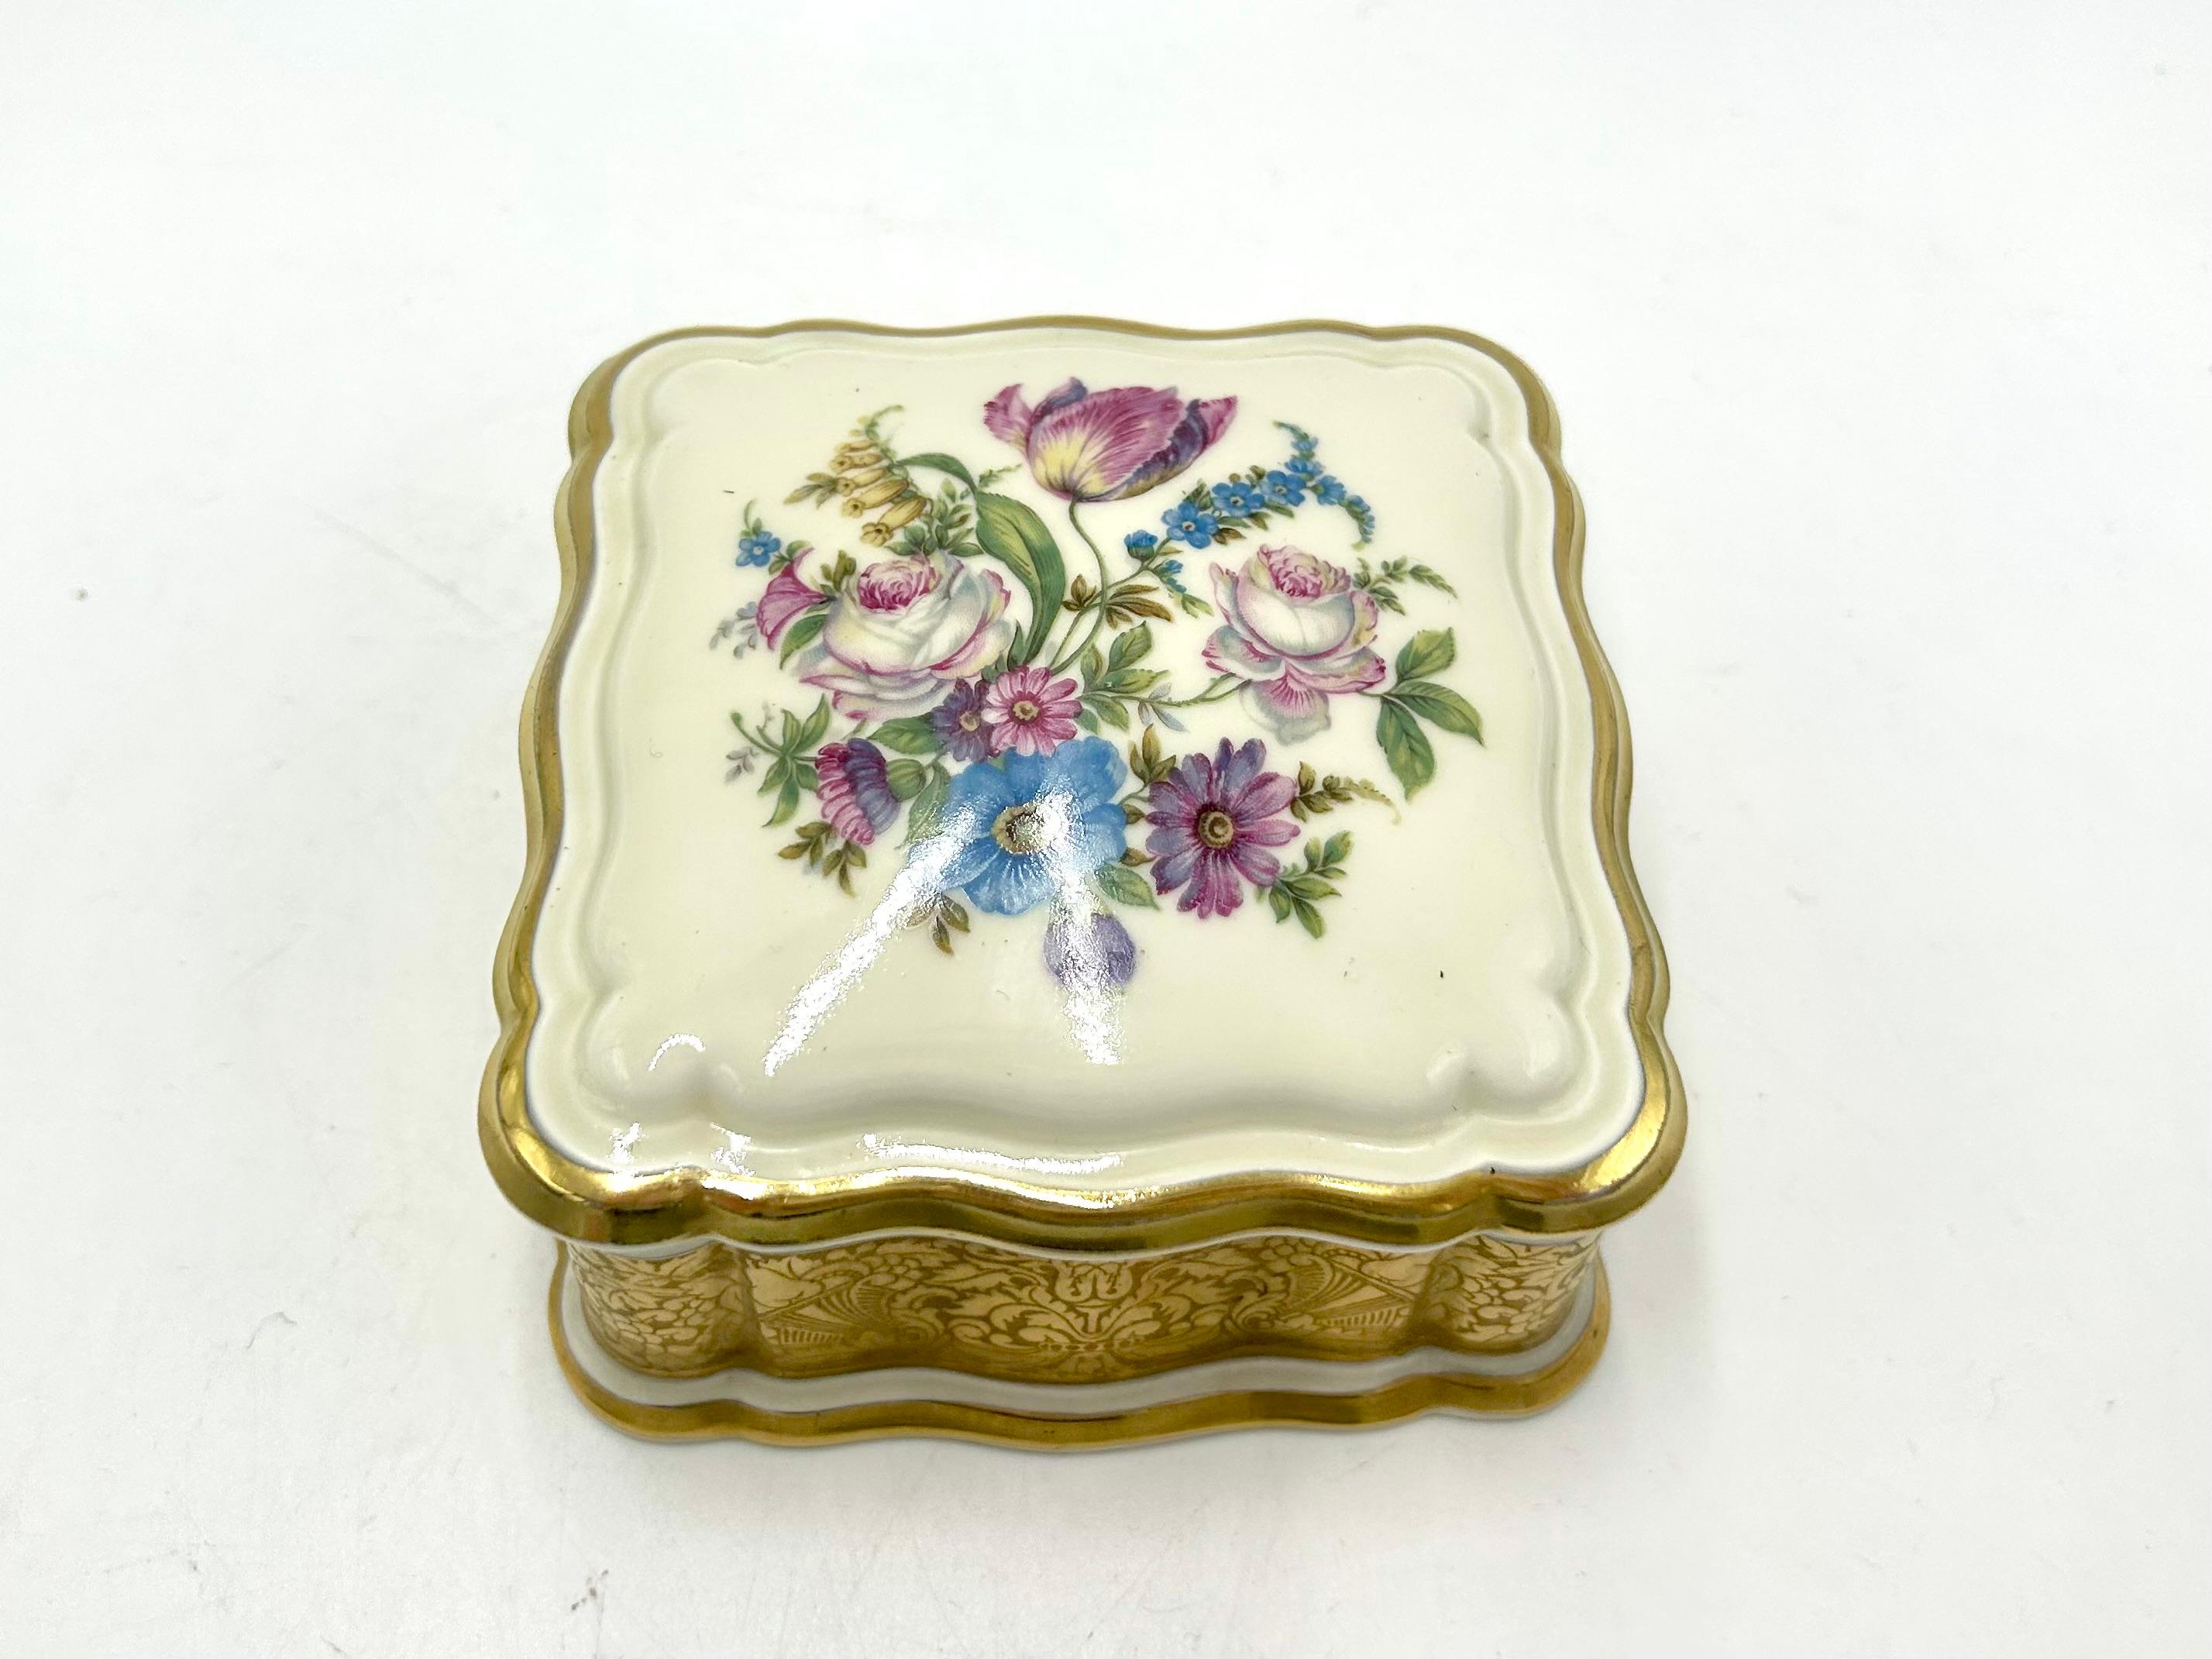 Porcelain casket - a box for jewelry and trinkets.

Ivory-colored porcelain decorated with gilding and a floral bouquet motif.

A product of the renowned German manufacturer Rosenthal. Chippendale series. Signed with a mark from 1951.

Very